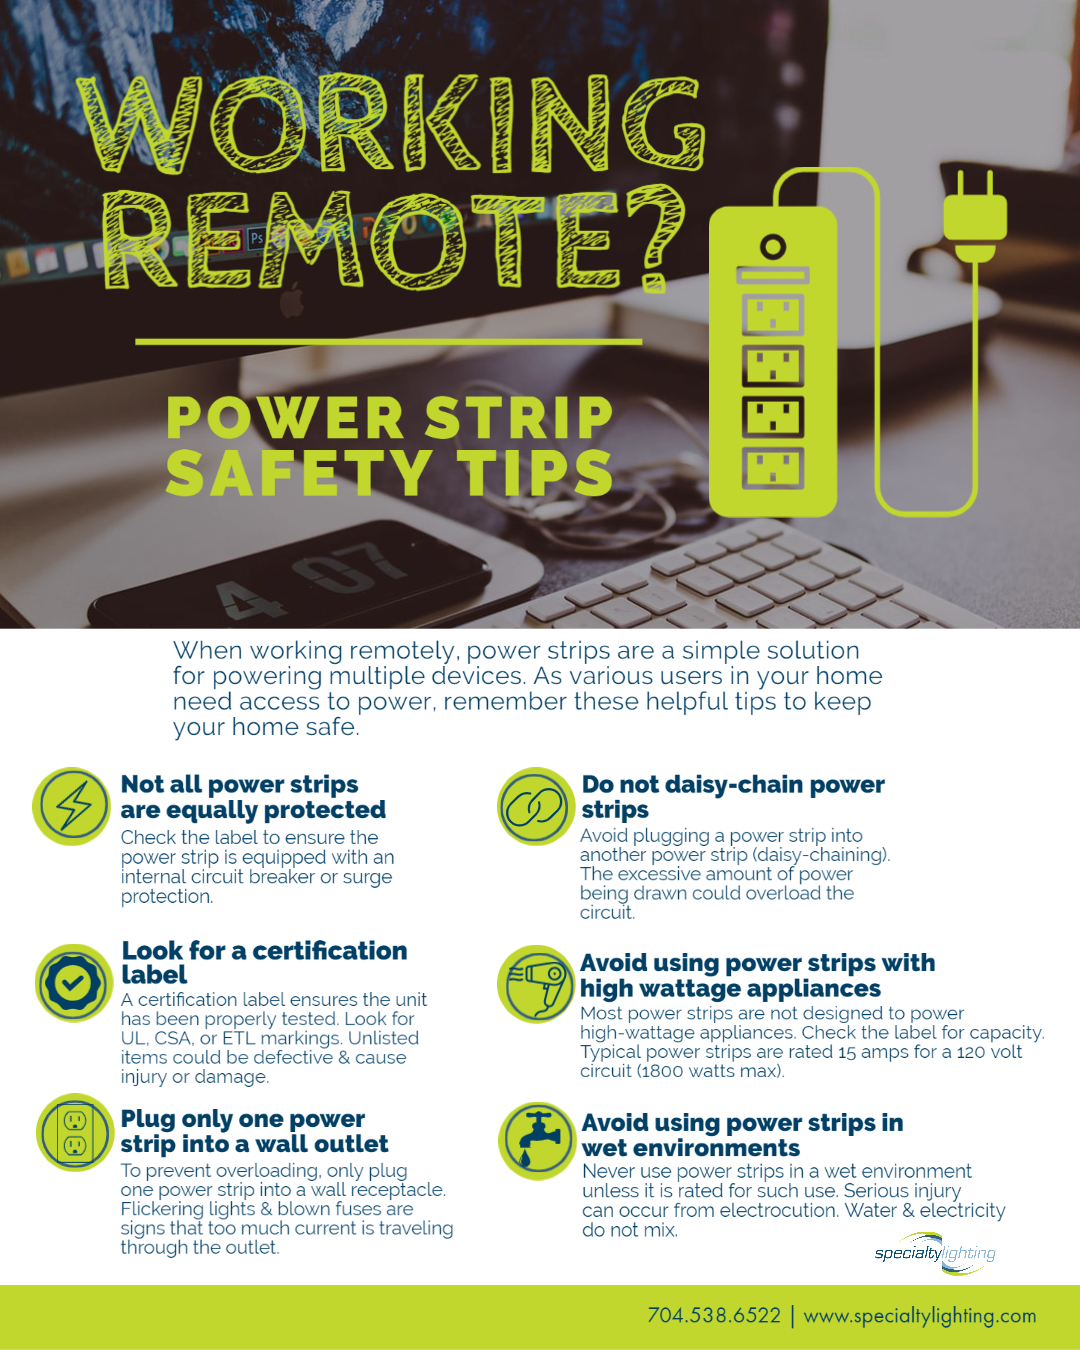 Working Remote? Power Strip Safety Tips - Specialty Lighting